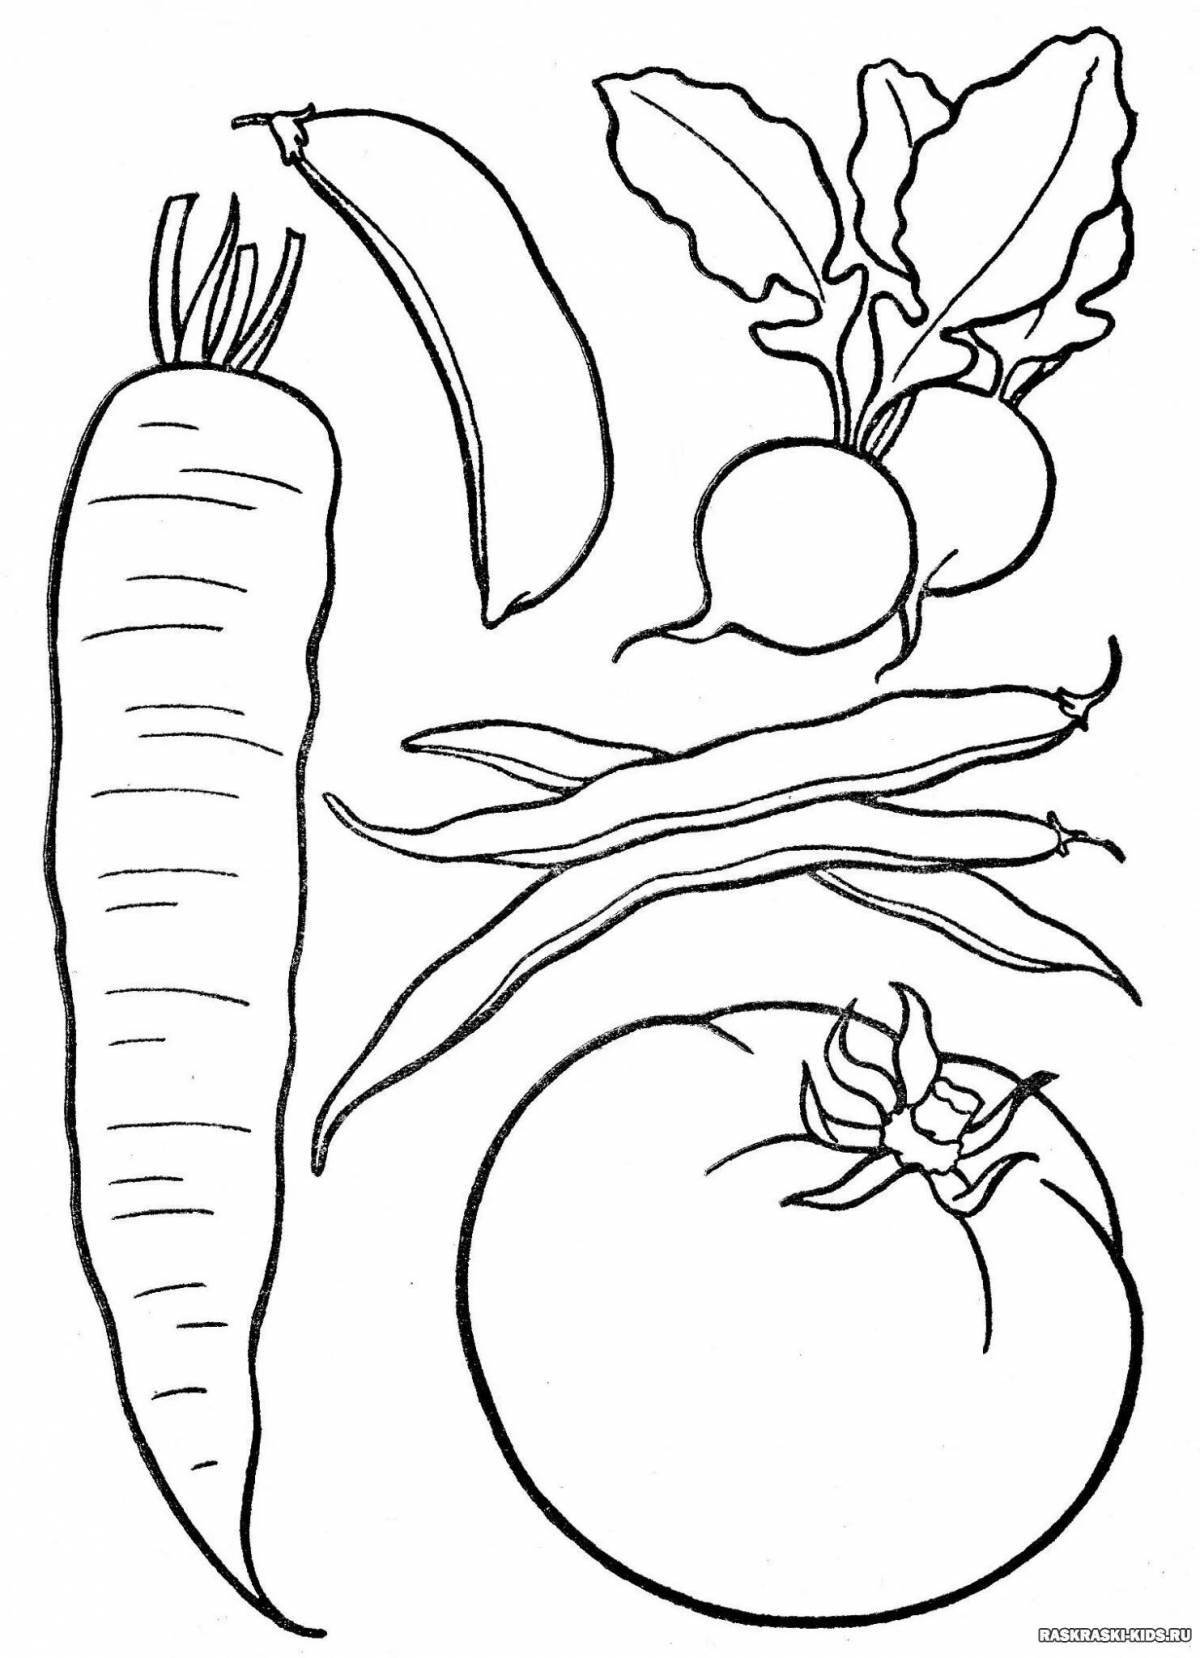 Live vegetable coloring book for kids